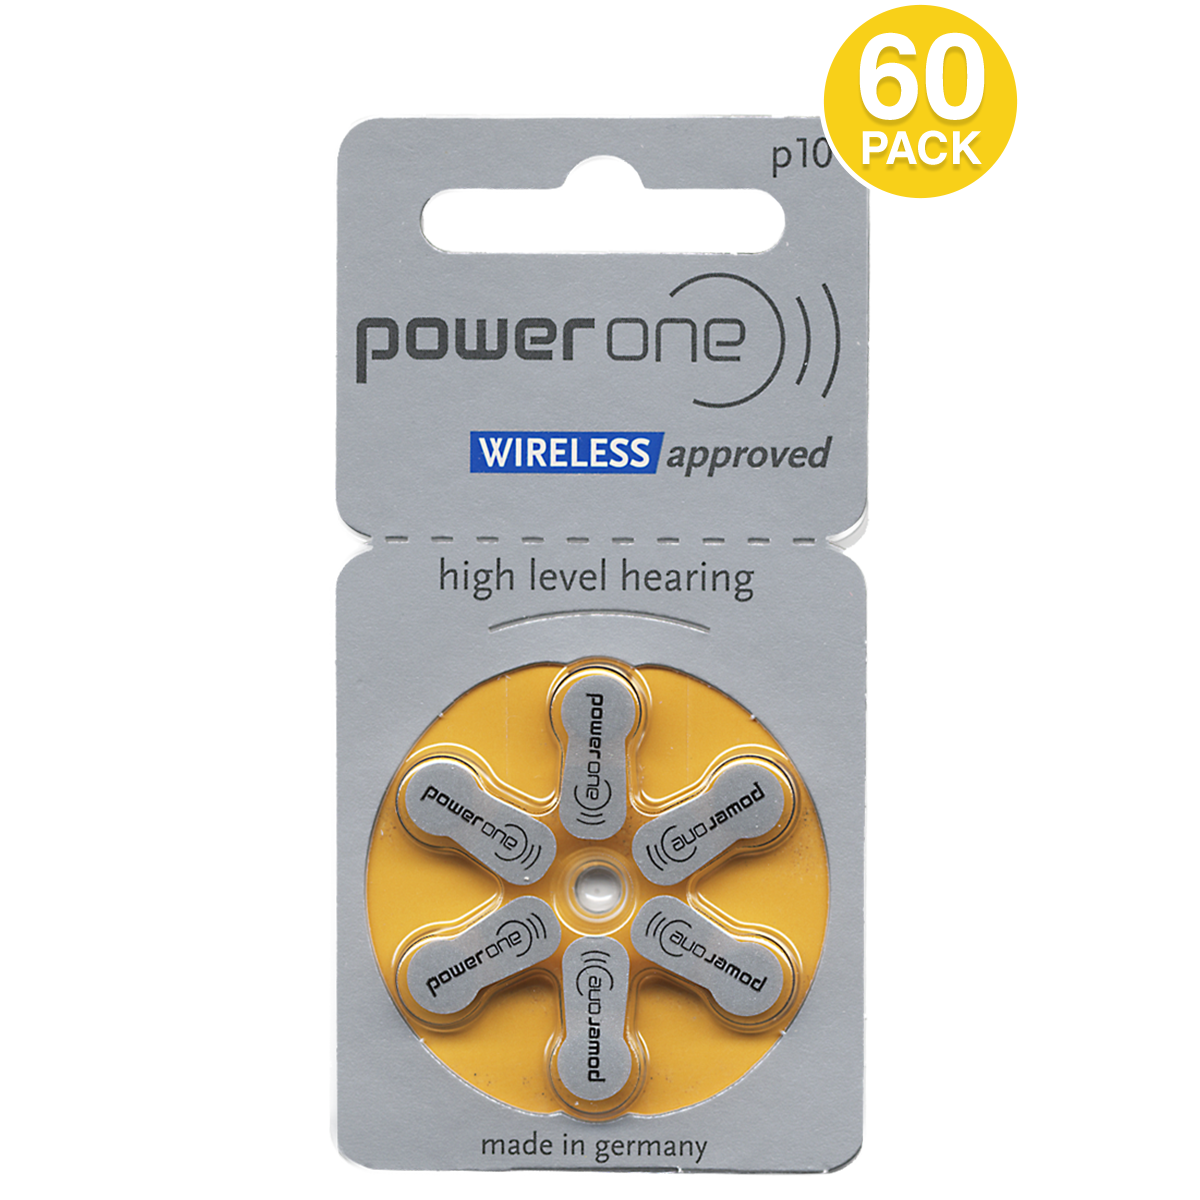 Power One Size 10 Mercury Free 1.45v Hearing Aid Batteries P10 Pr70 (60 Pack)